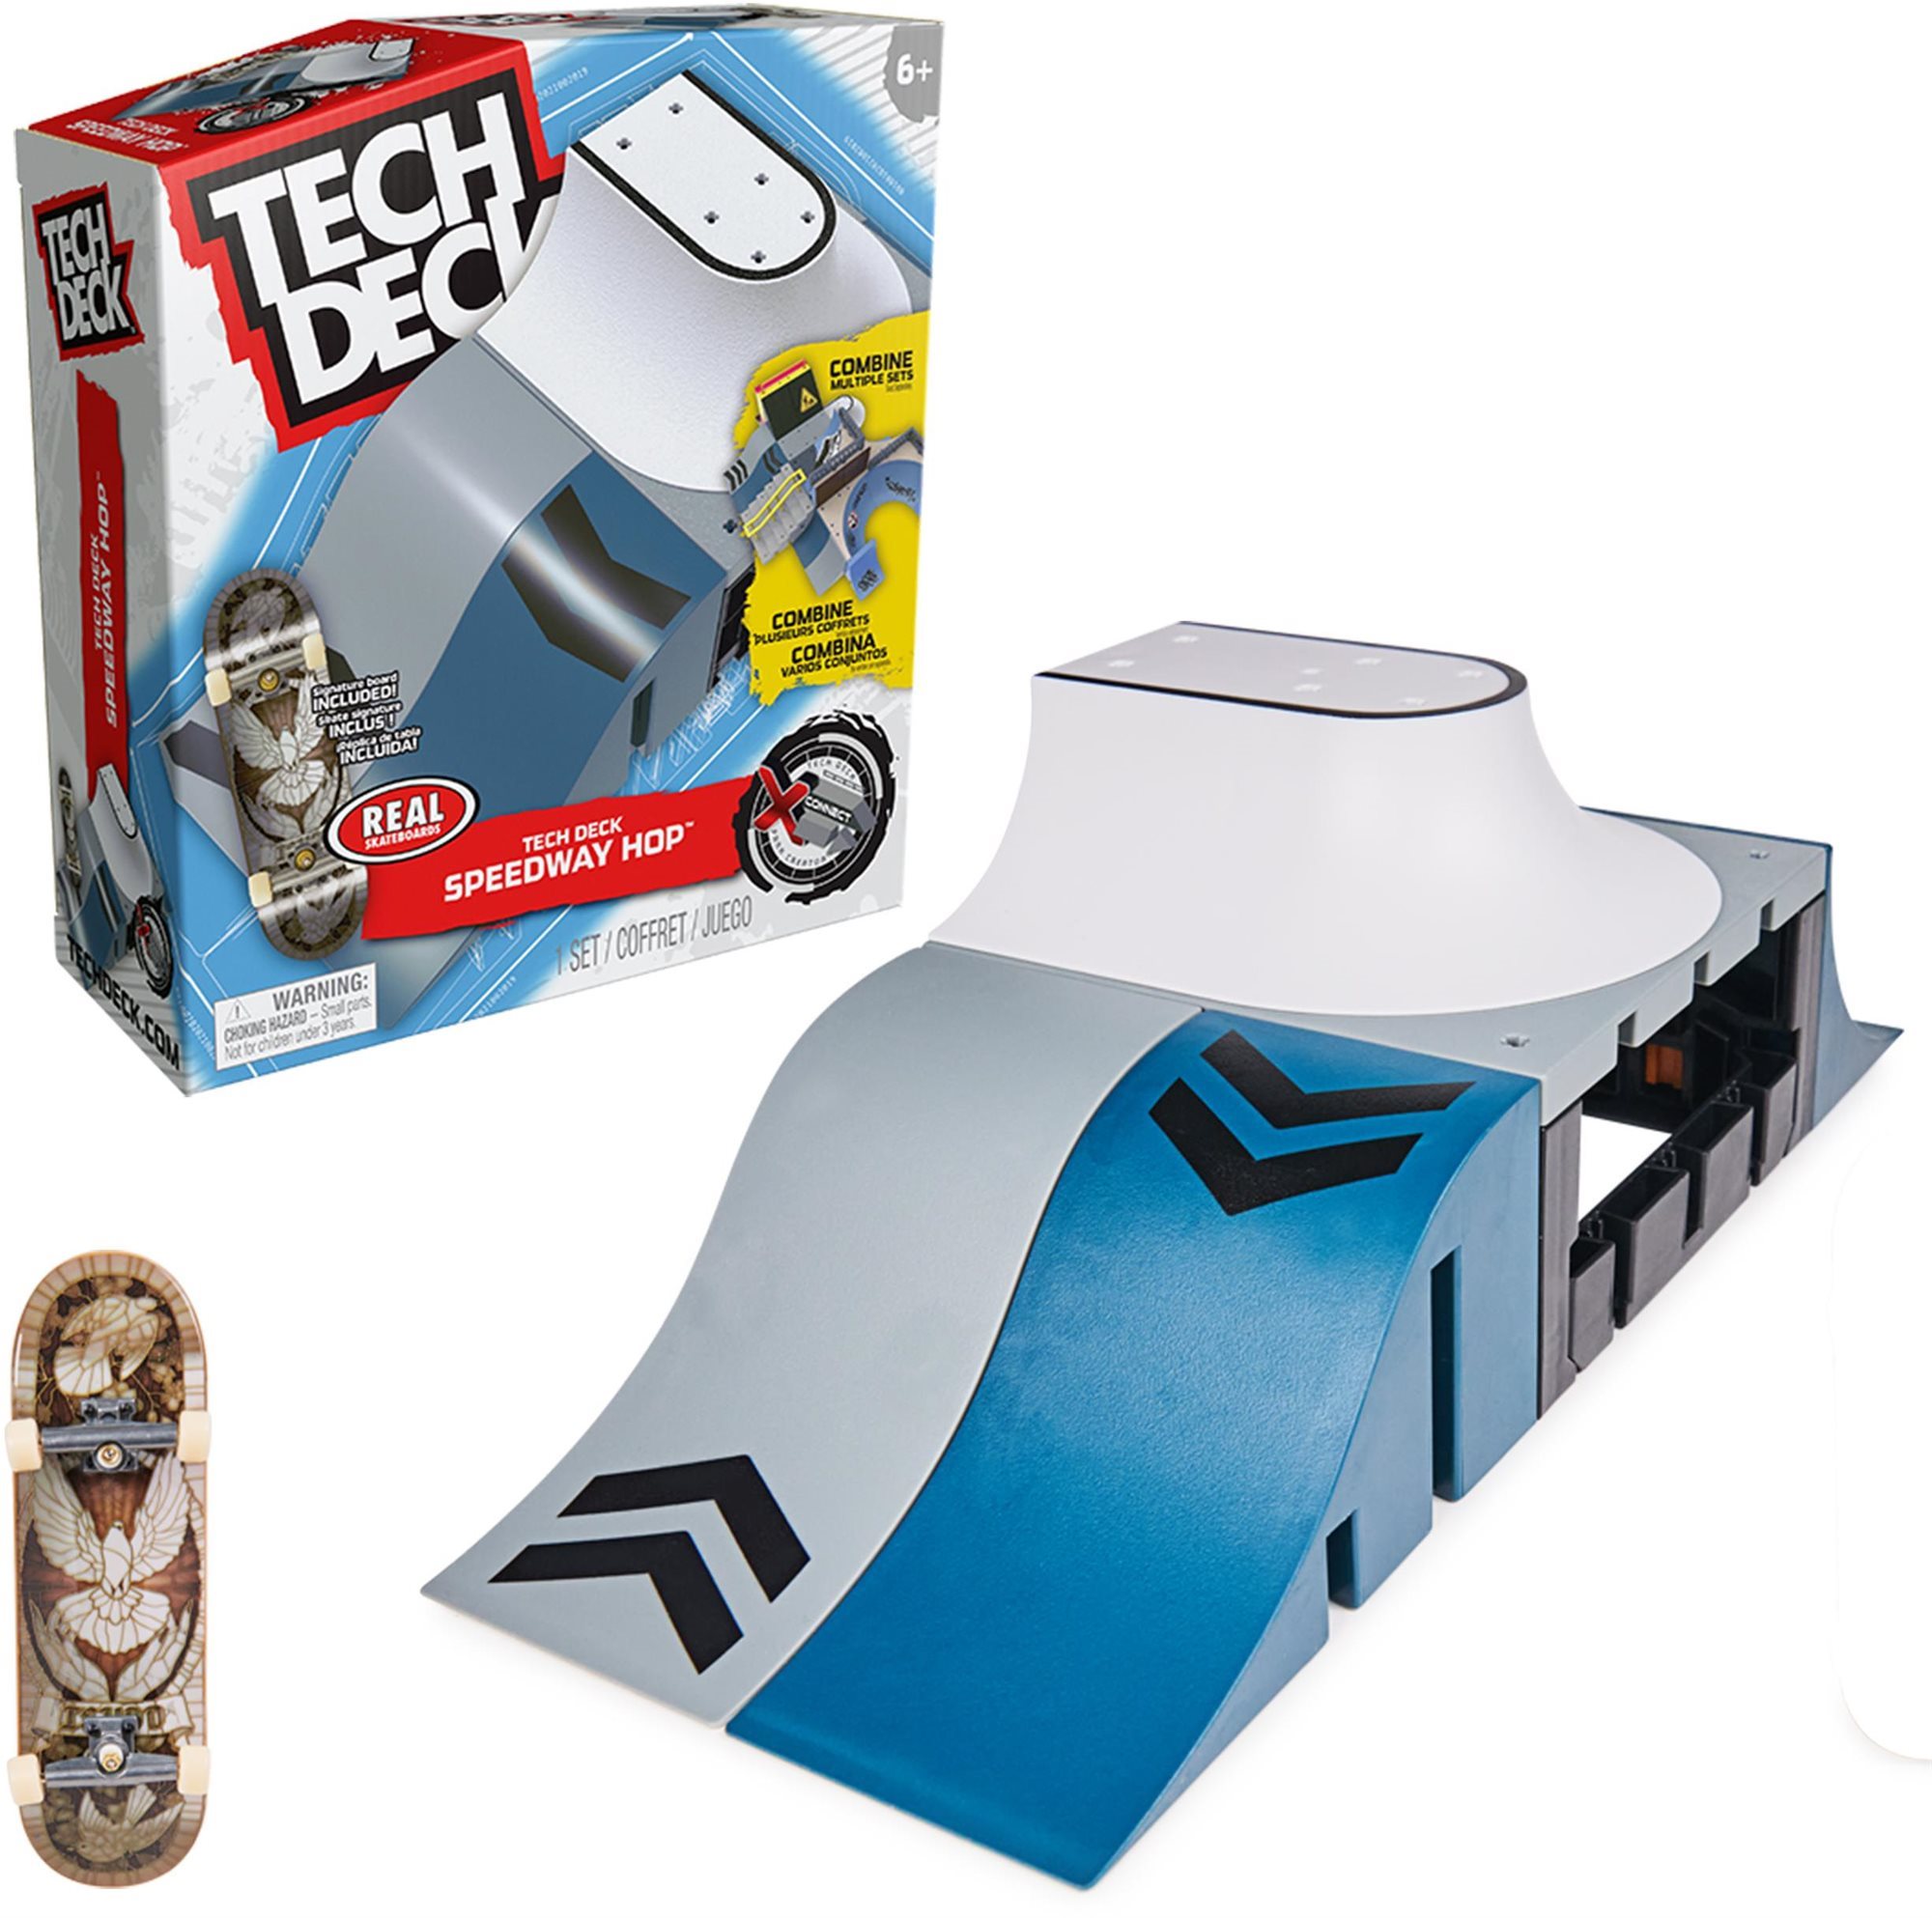 Tech Deck Xconnect Speed wave